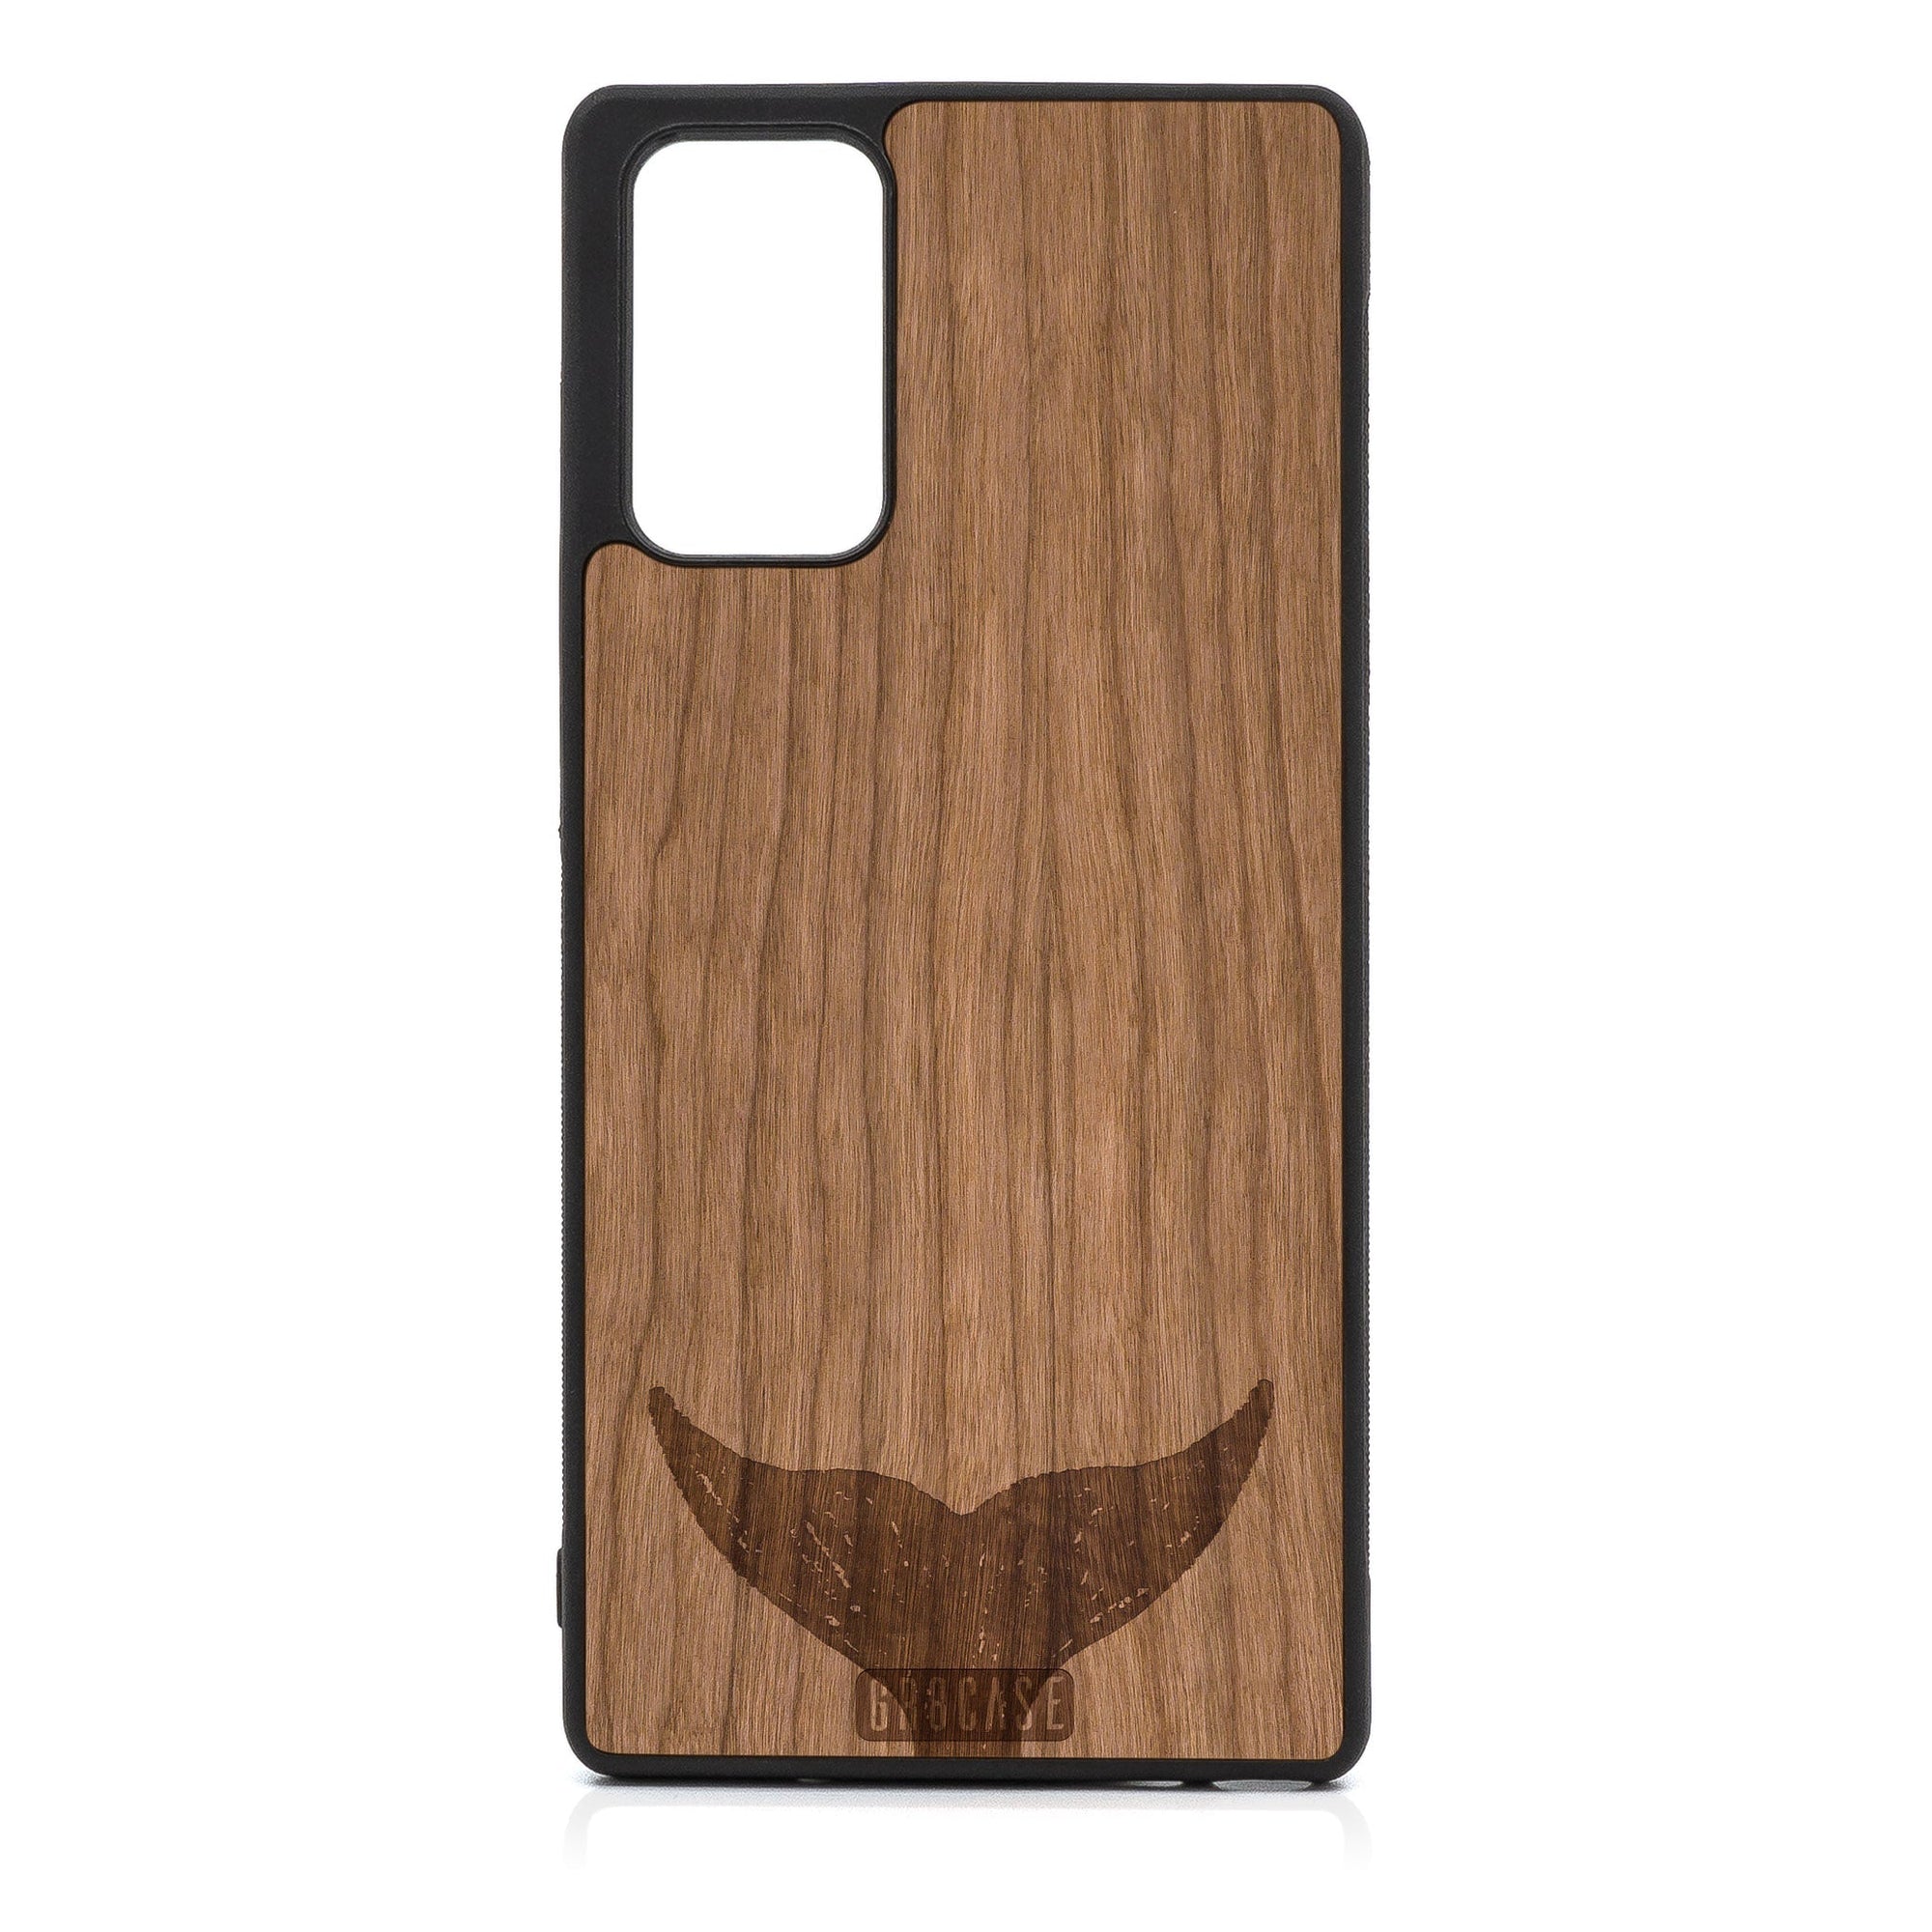 Whale Tail Design Wood Case For Samsung Galaxy A72 5G